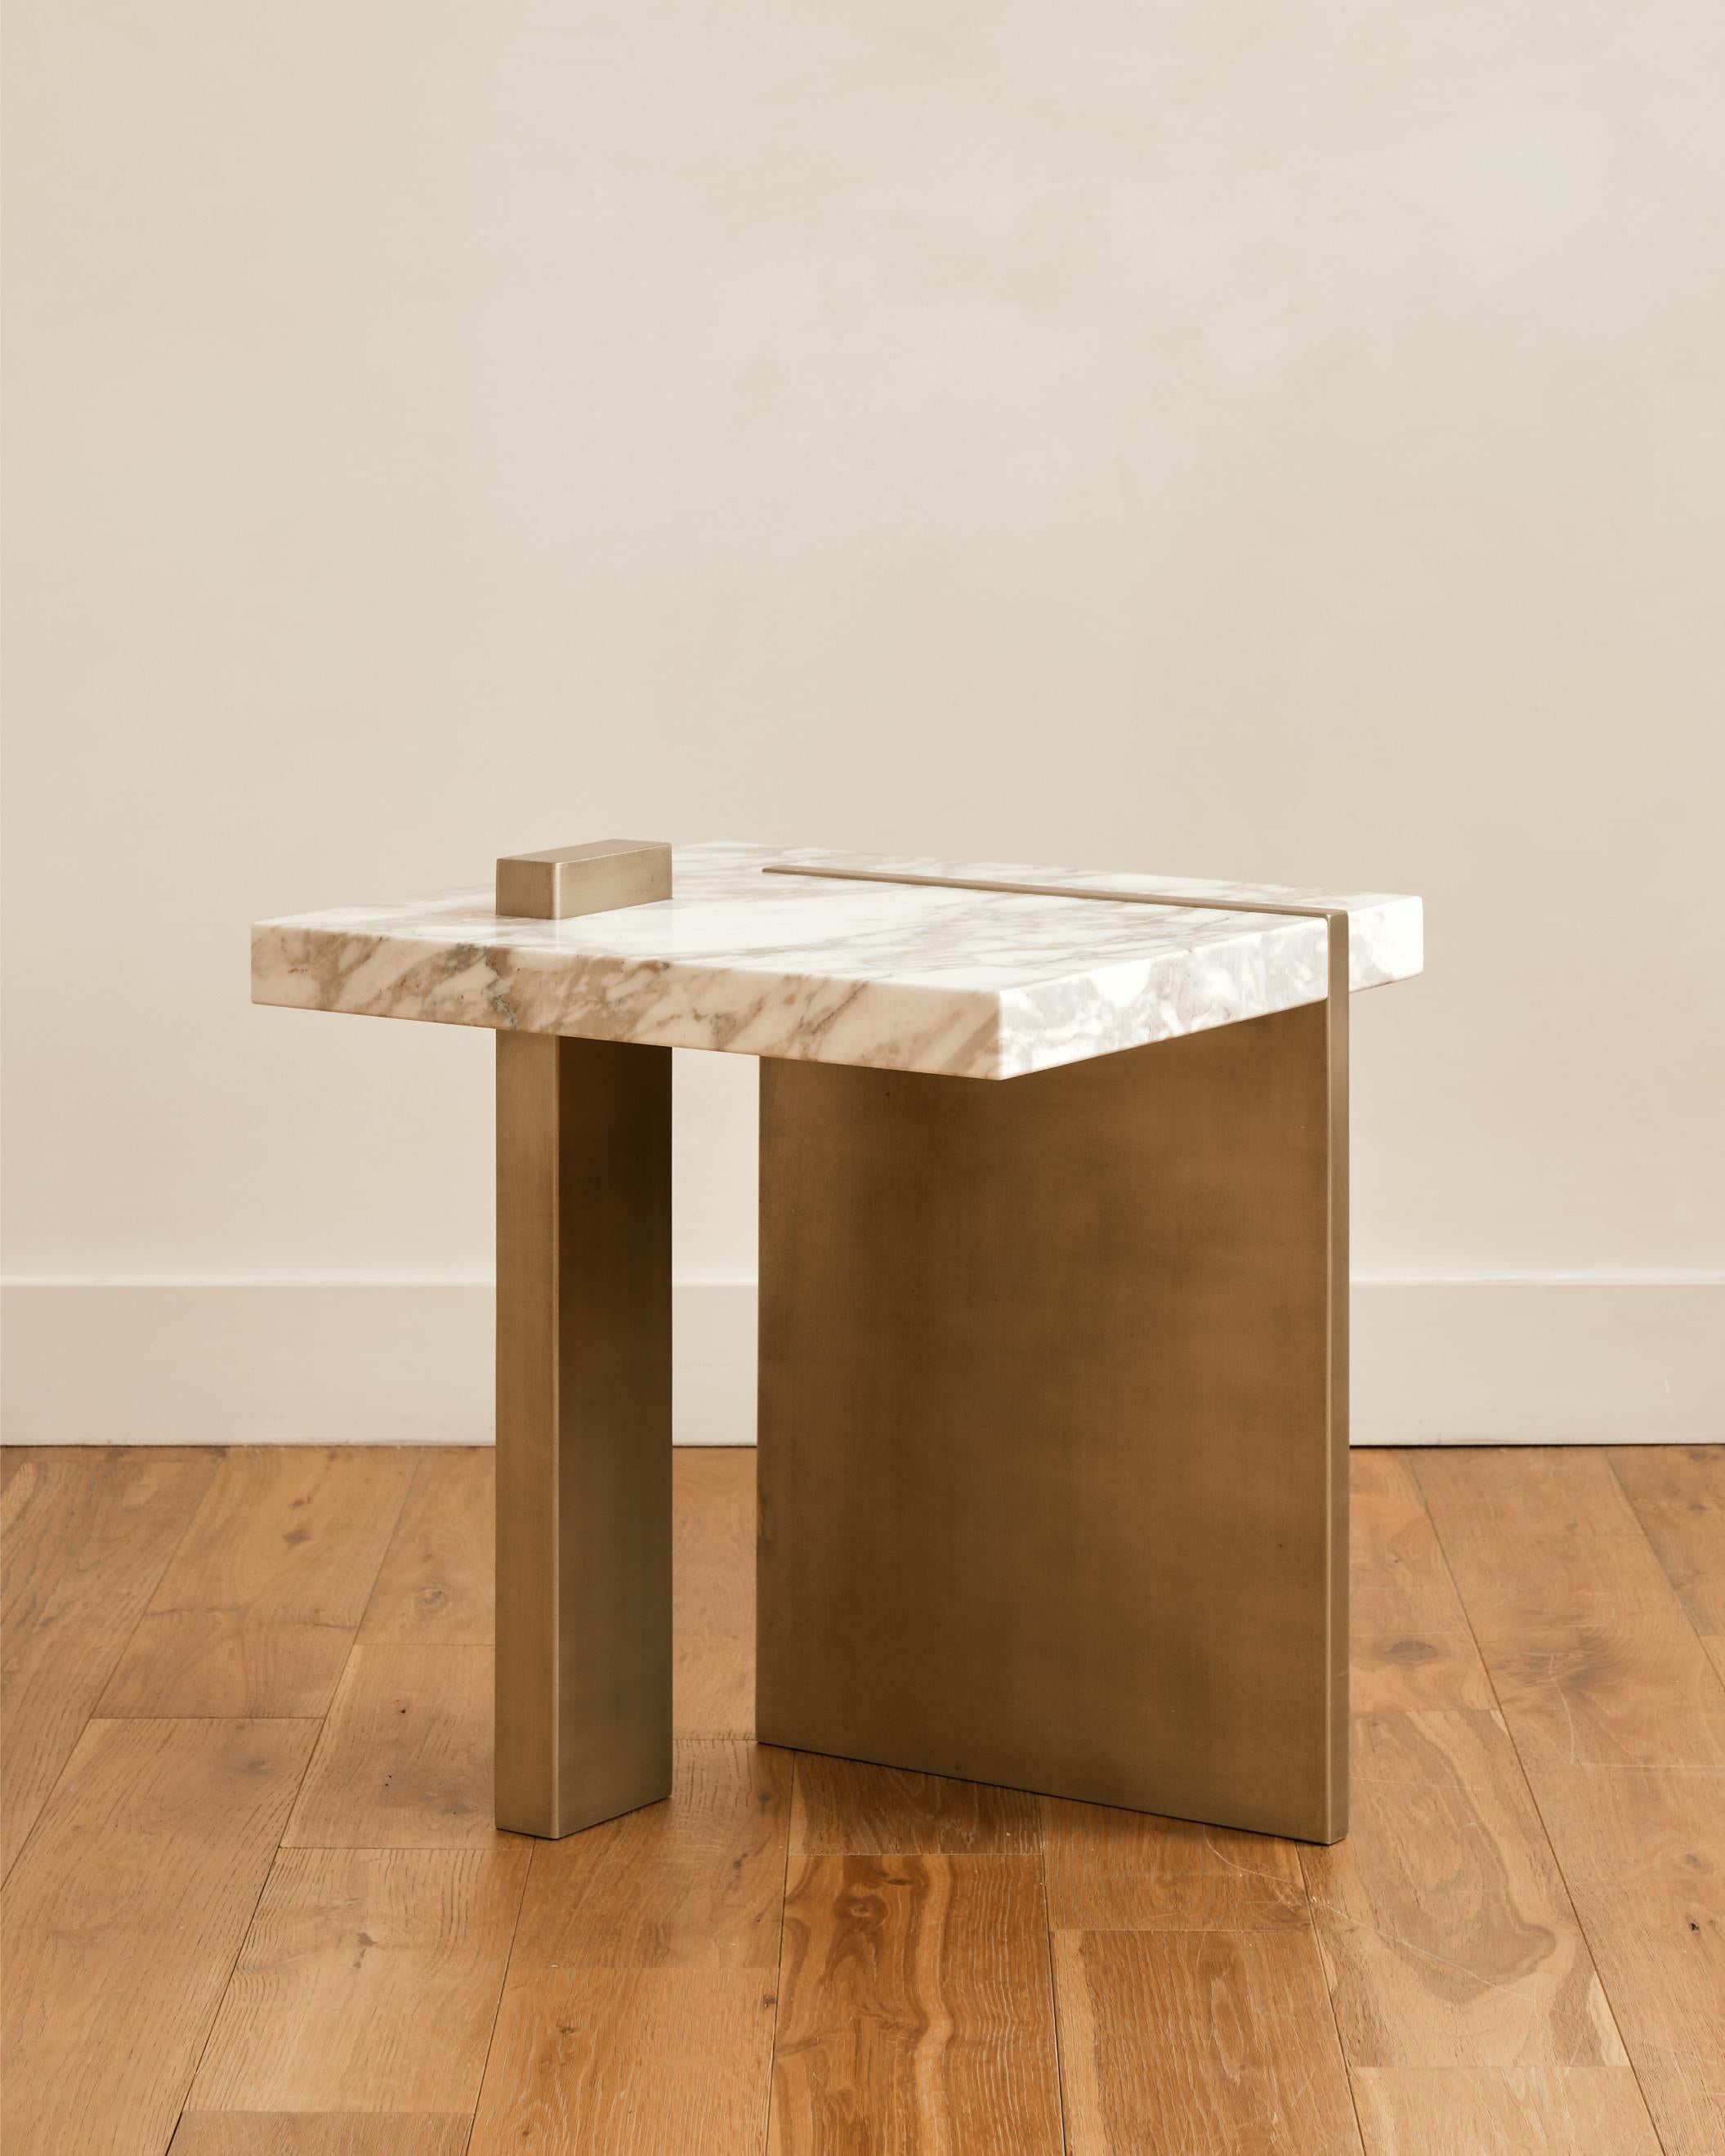 Capri Side Table by Studio Sam London
Dimensions: W 40 x D 45 x H 45 cm
Materials: Arabescato Oro Marble and Liquid Metal

The Capri side table is inspired by the rocks of Capri, represented by the solid marble slab that meet the sea on a early